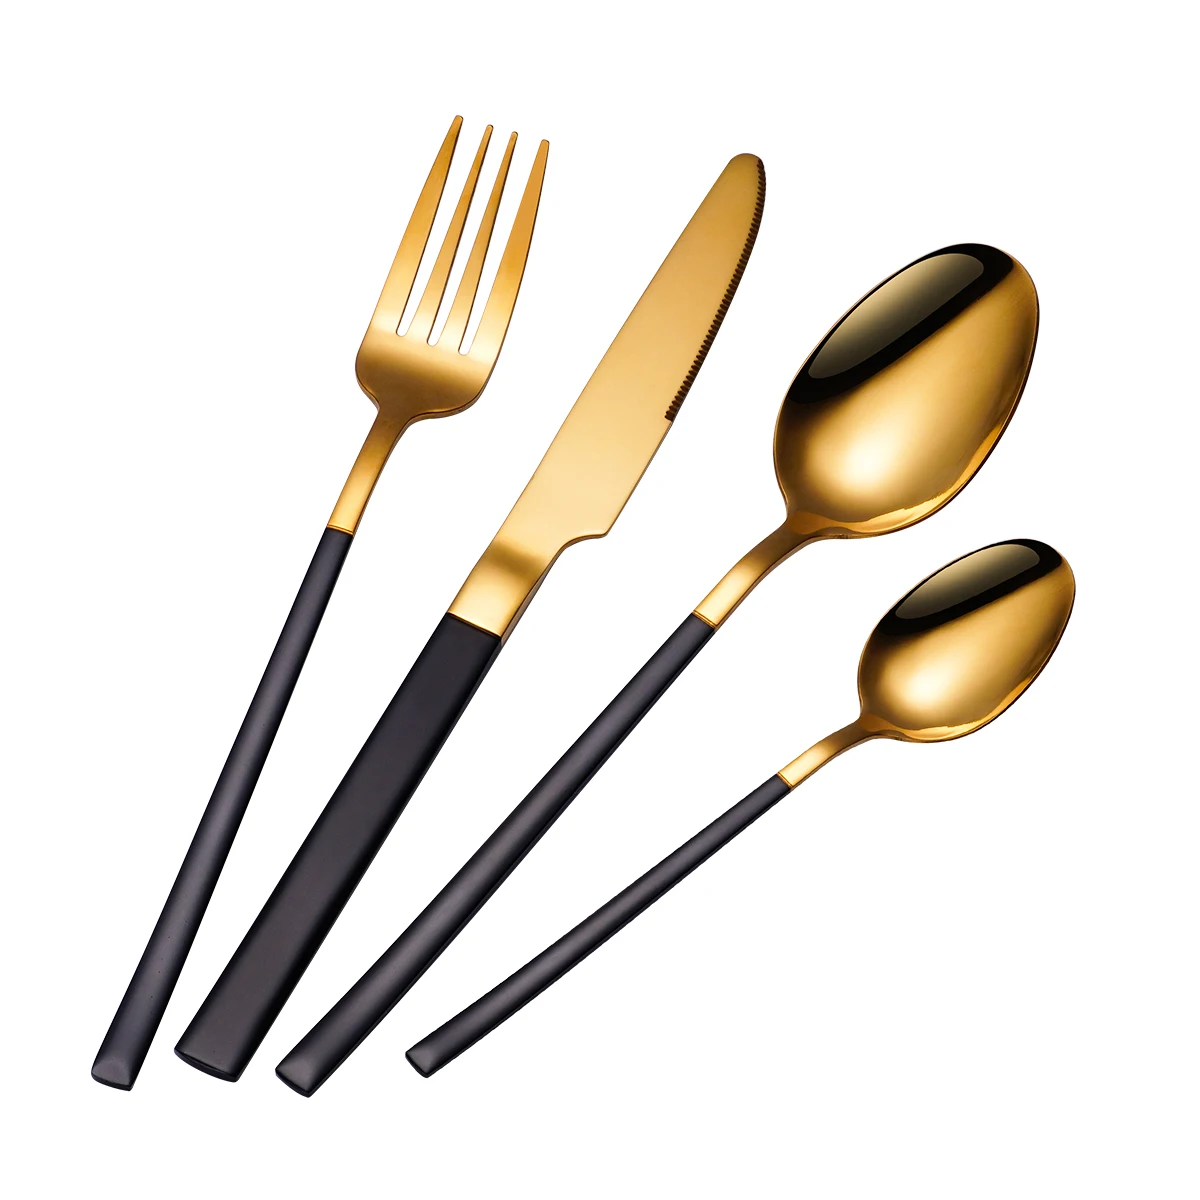 

Amazon Hot Sale Wholesale Silverware Luxury Stainless Steel Flatware Wedding Black Gold Handle Knife Fork Spoon Cutlery Set, Silver, gold, rose gold, colorful, black, customizable